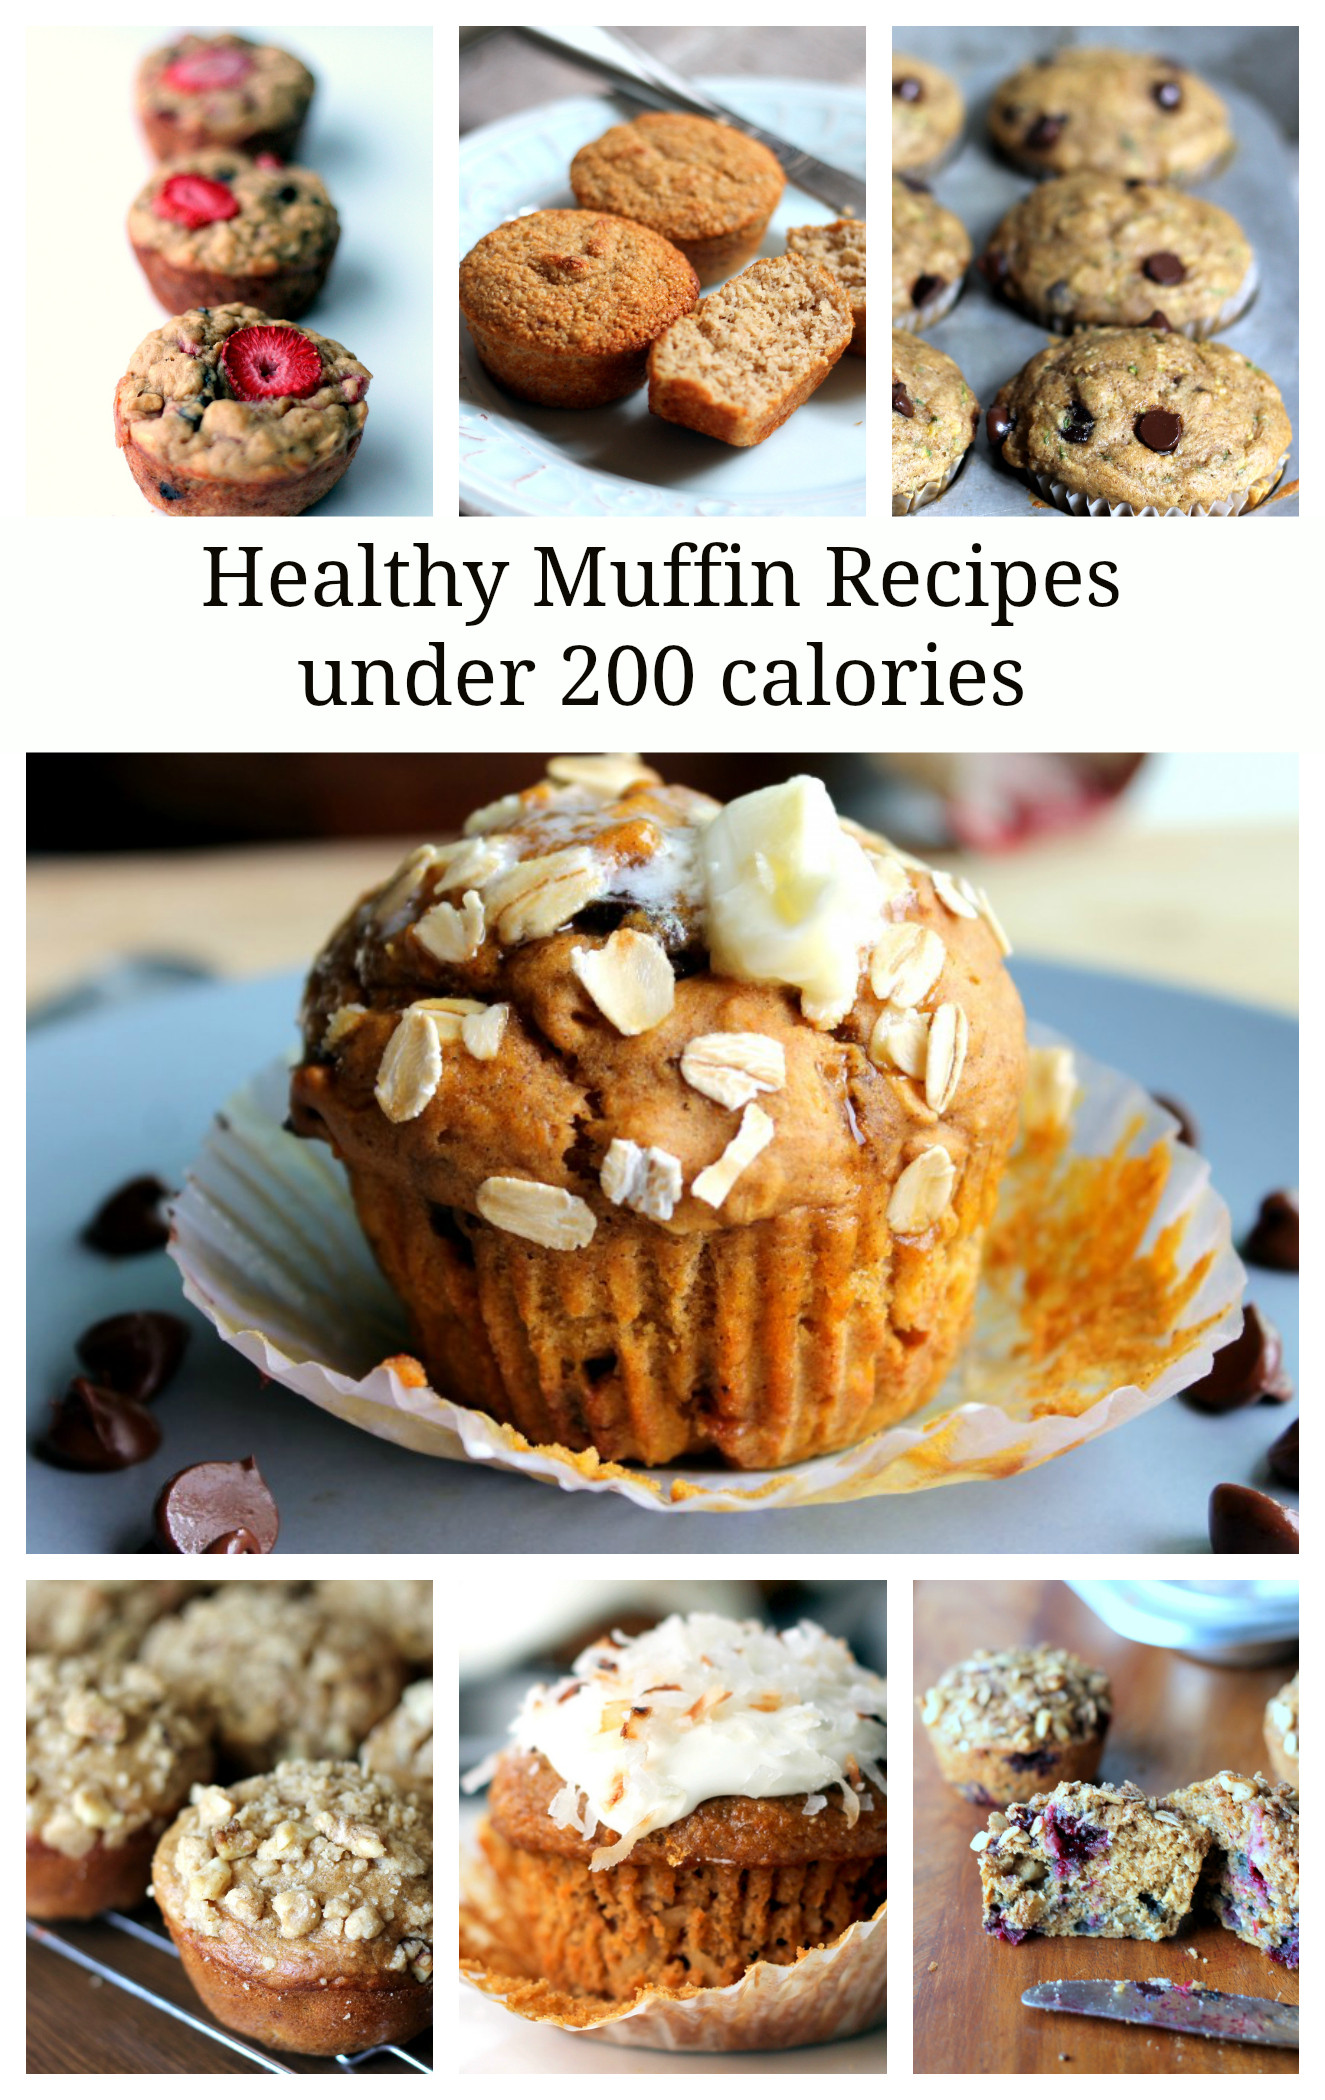 Healthy Breakfast Muffin Recipes
 7 Healthy Muffin Recipes Under 200 Calories